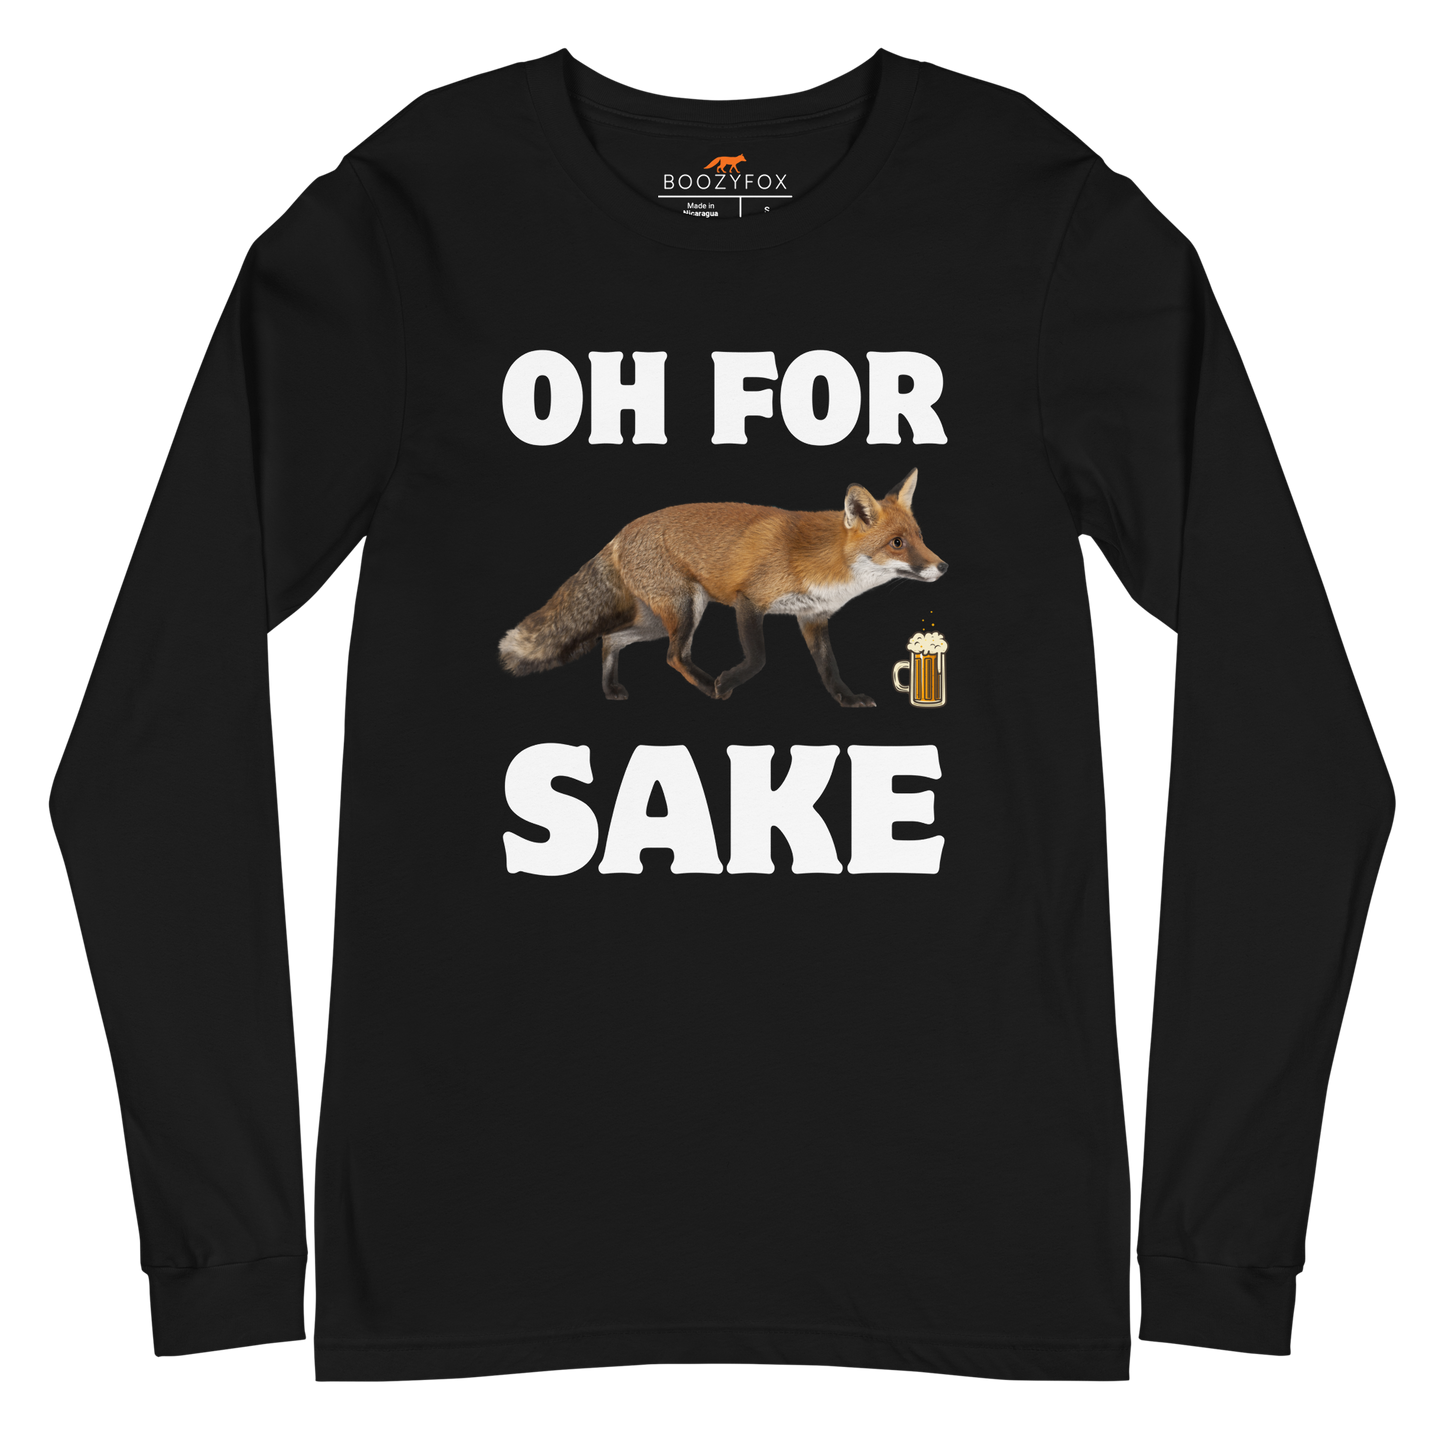 Black Fox Long Sleeve Tee featuring a Oh For Fox Sake graphic on the chest - Funny Fox Long Sleeve Graphic Tees - Boozy Fox